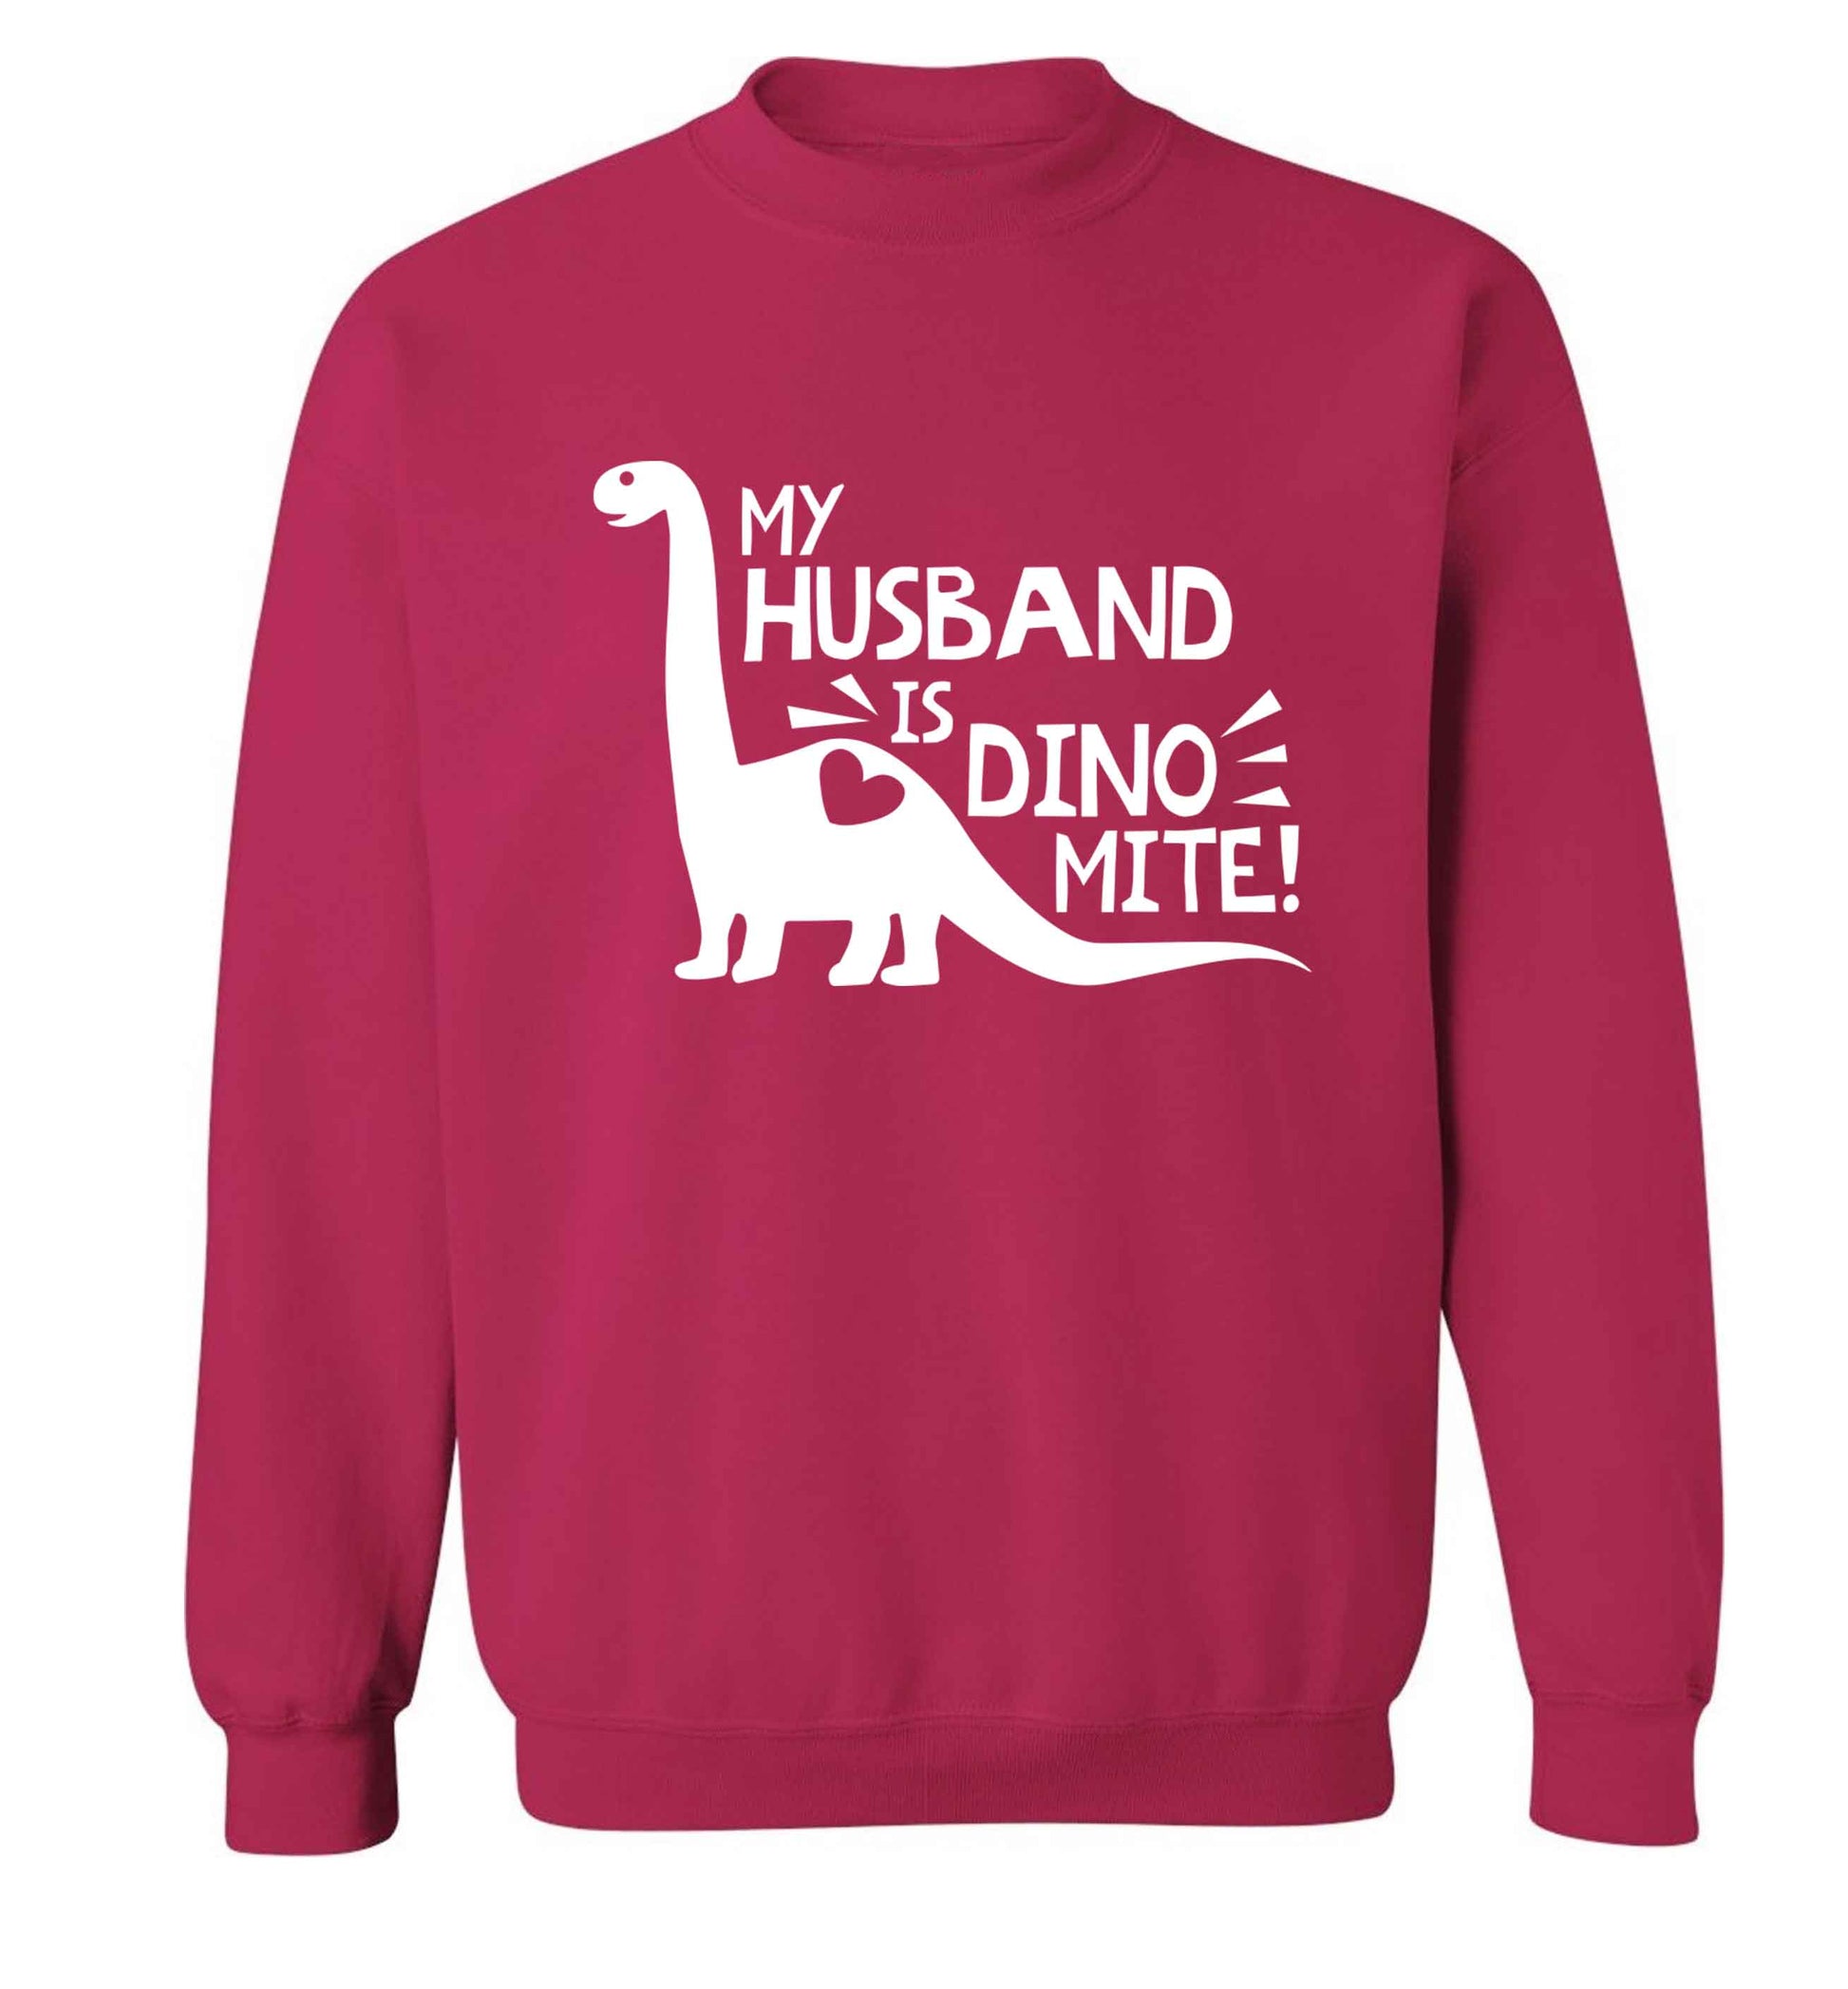 My husband is dinomite! Adult's unisex pink Sweater 2XL